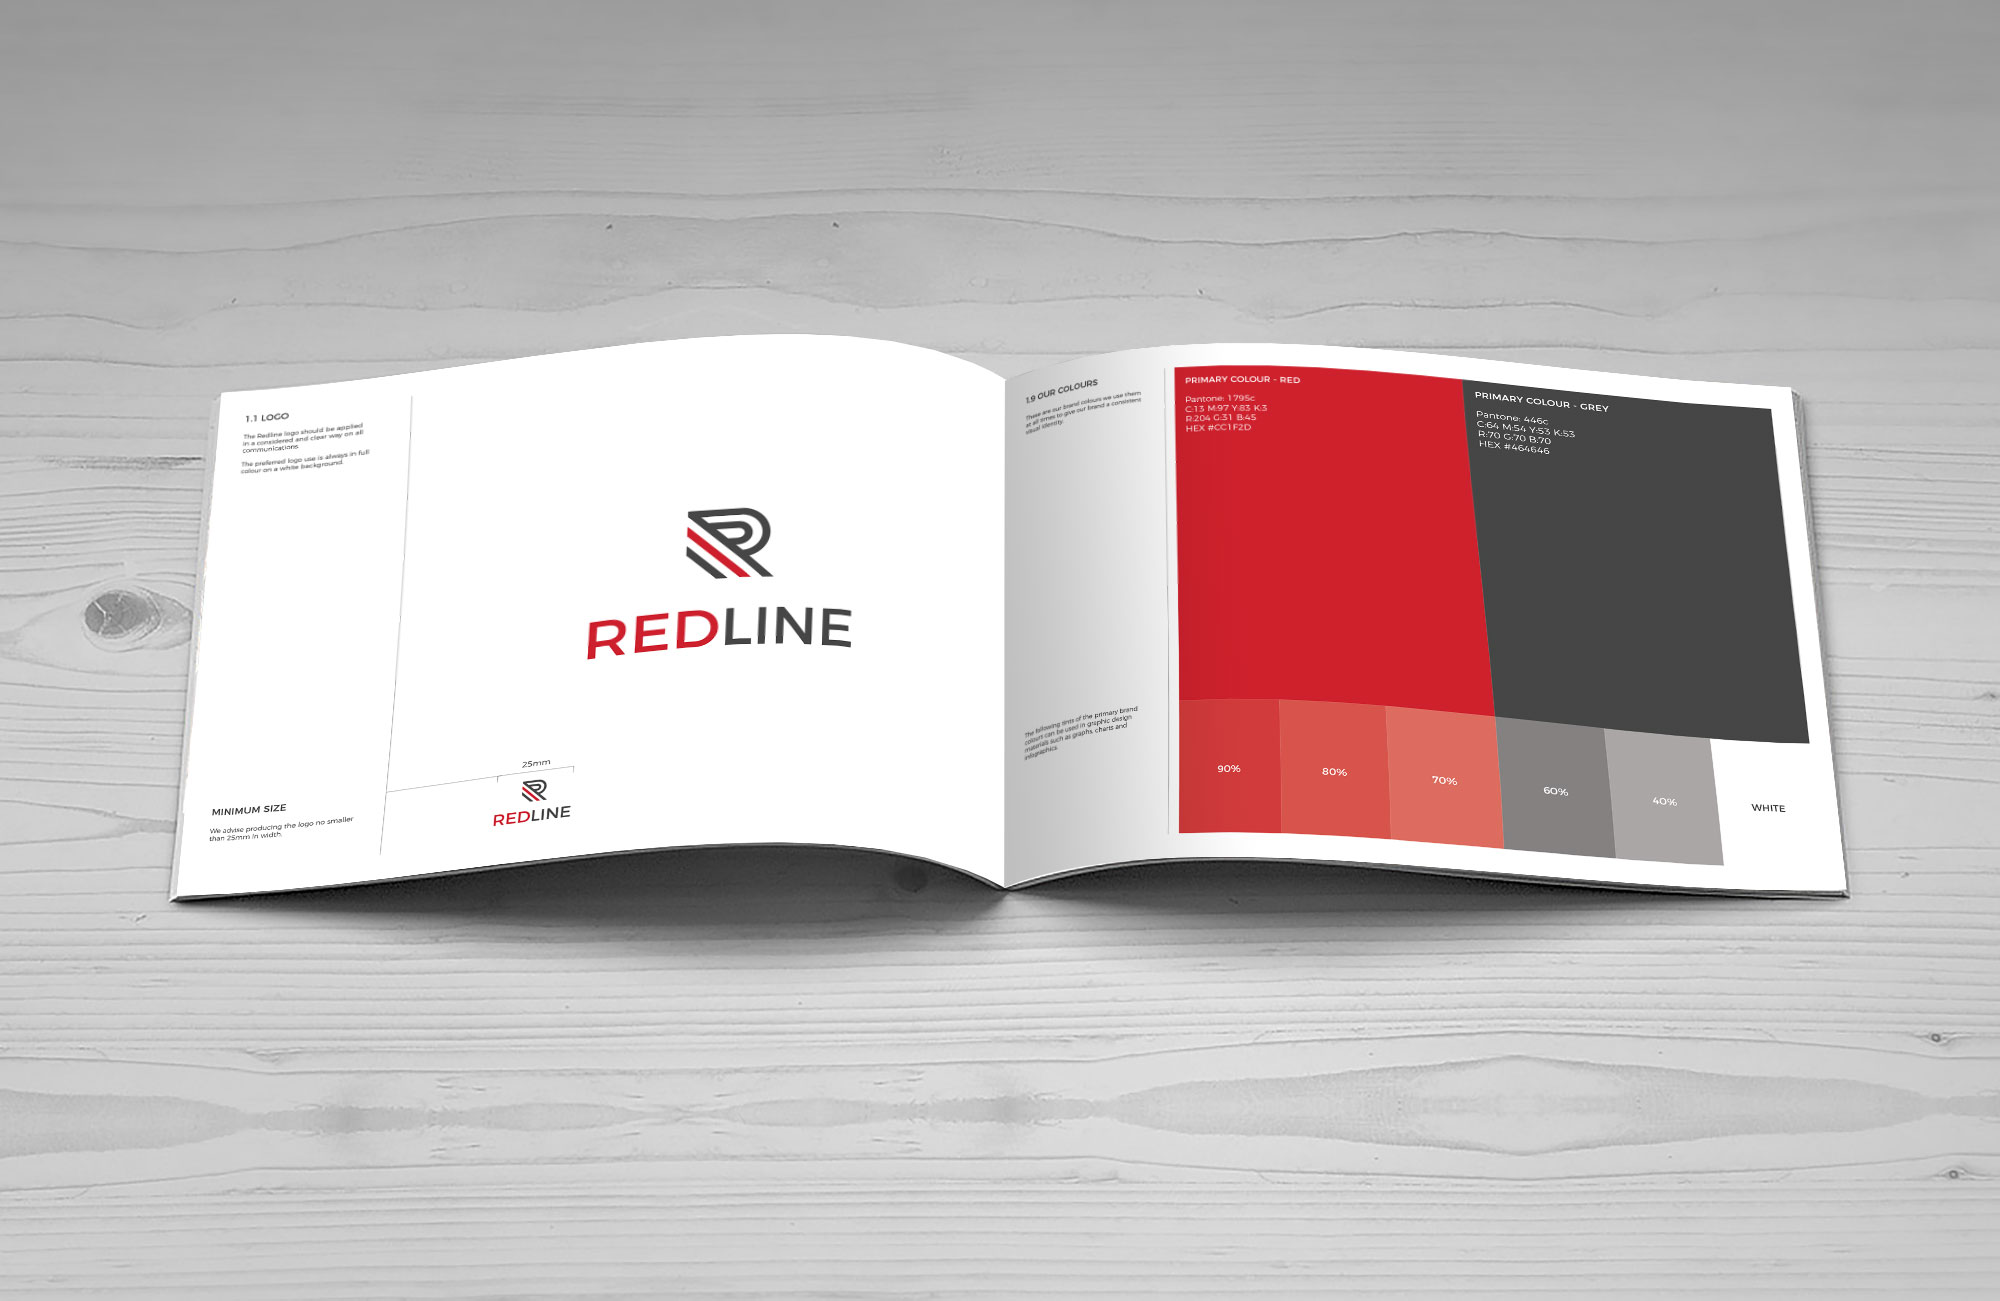 Brand guidelines document for Redline by Supersonic Playground